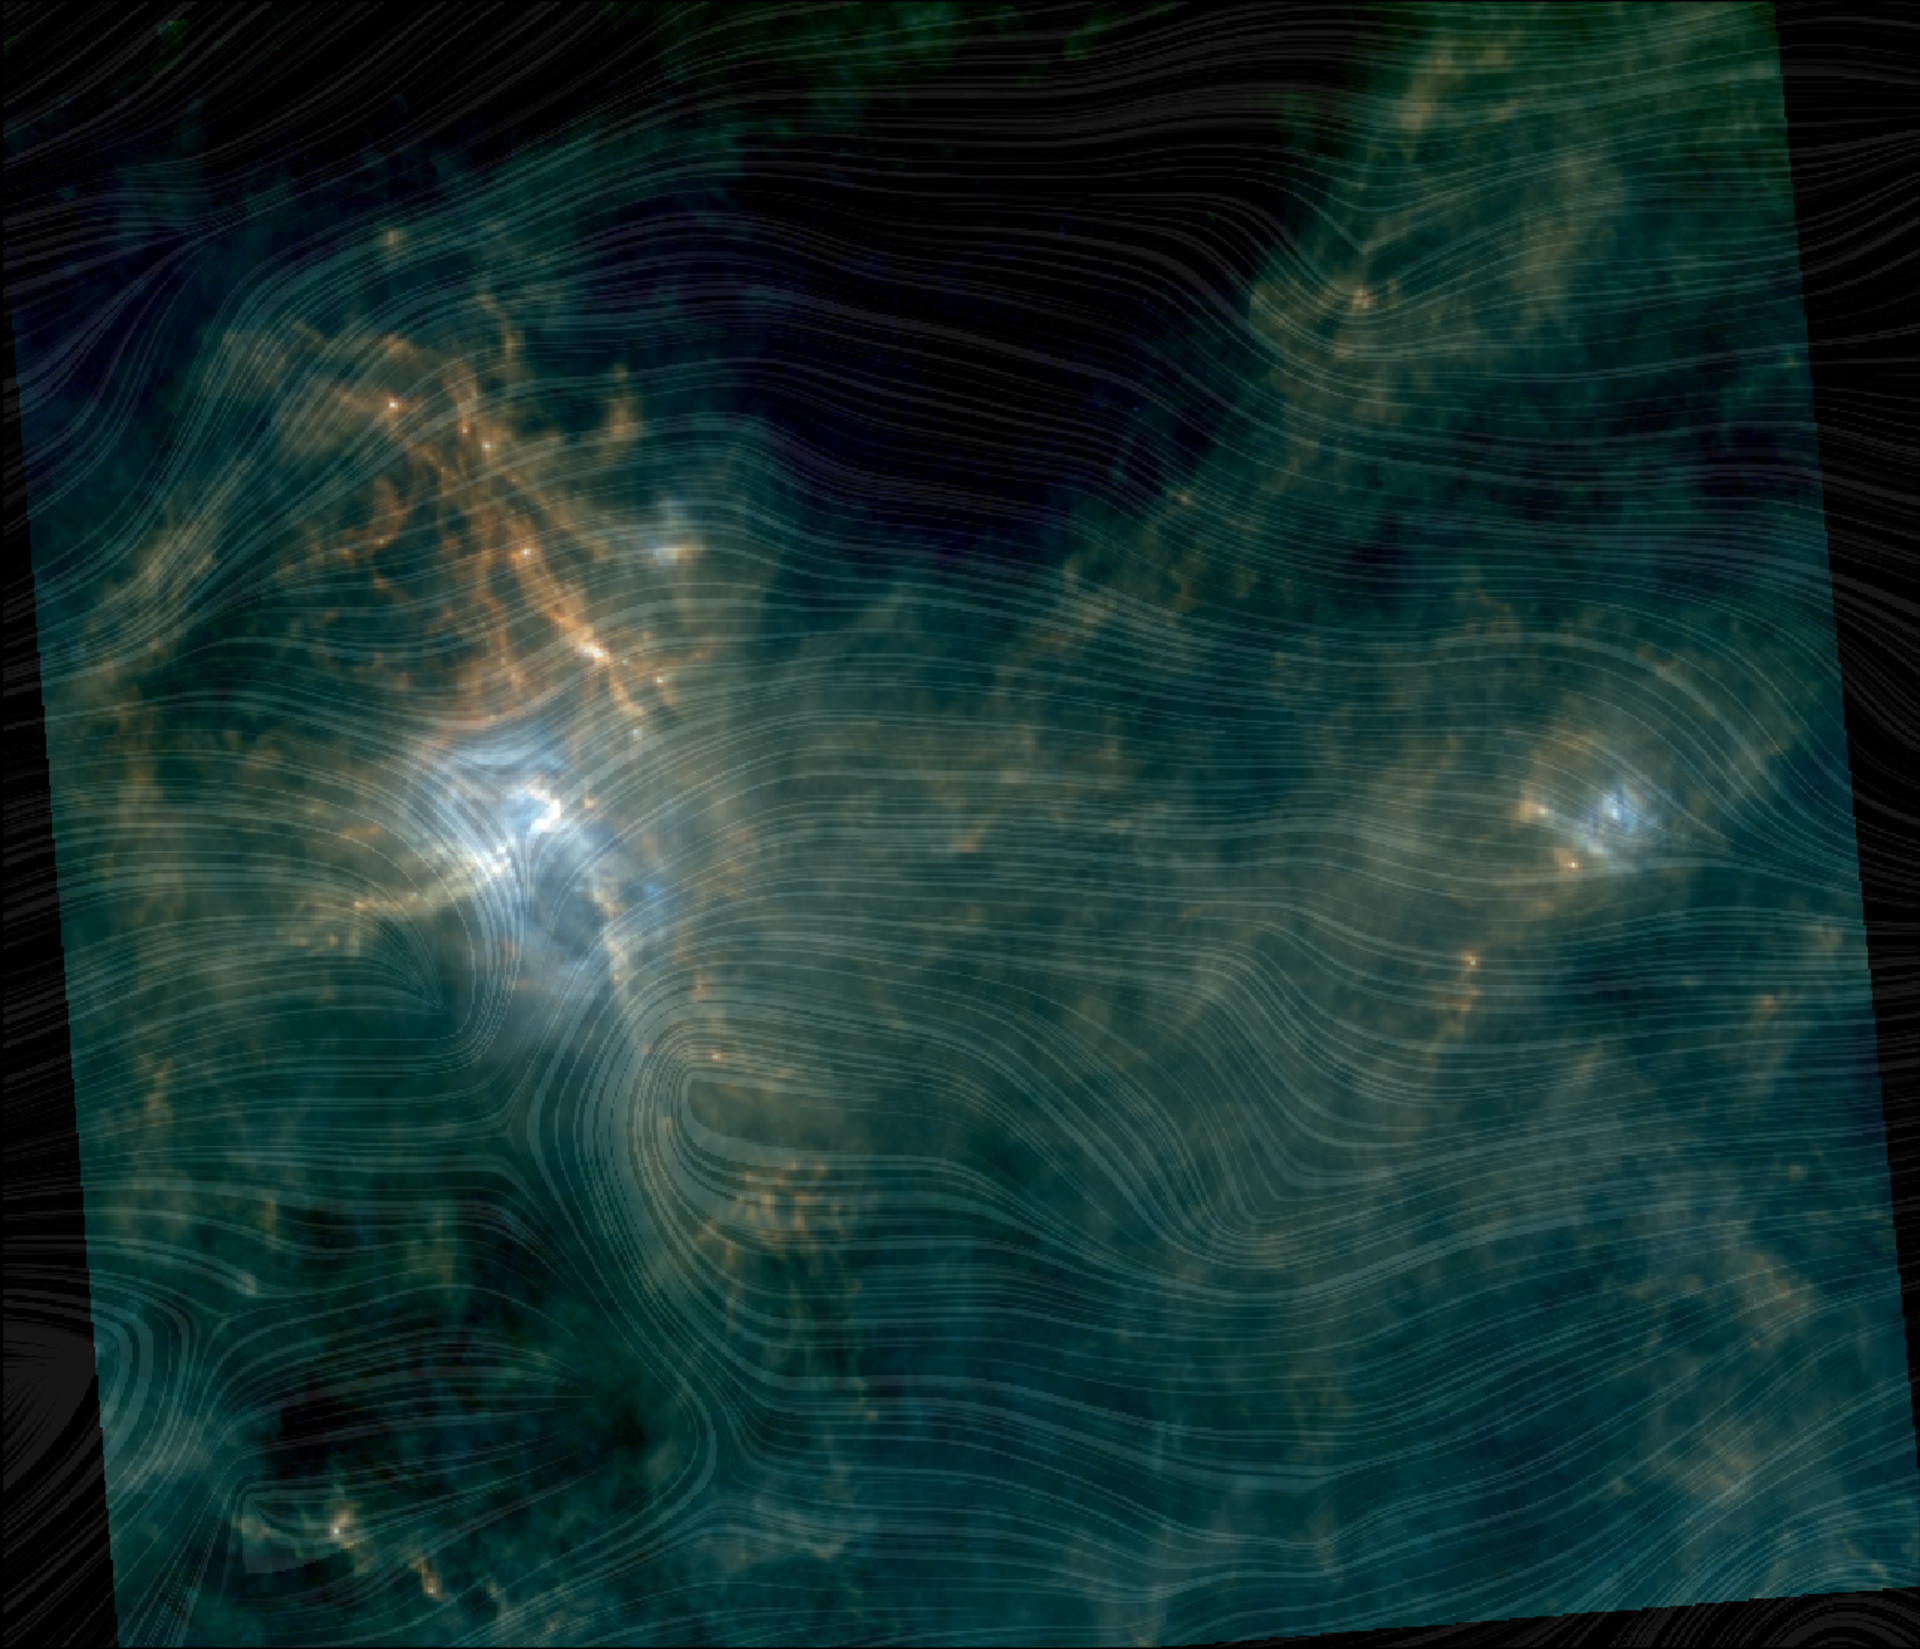 The Aquila Rift star-forming complex viewed by Herschel and Planck